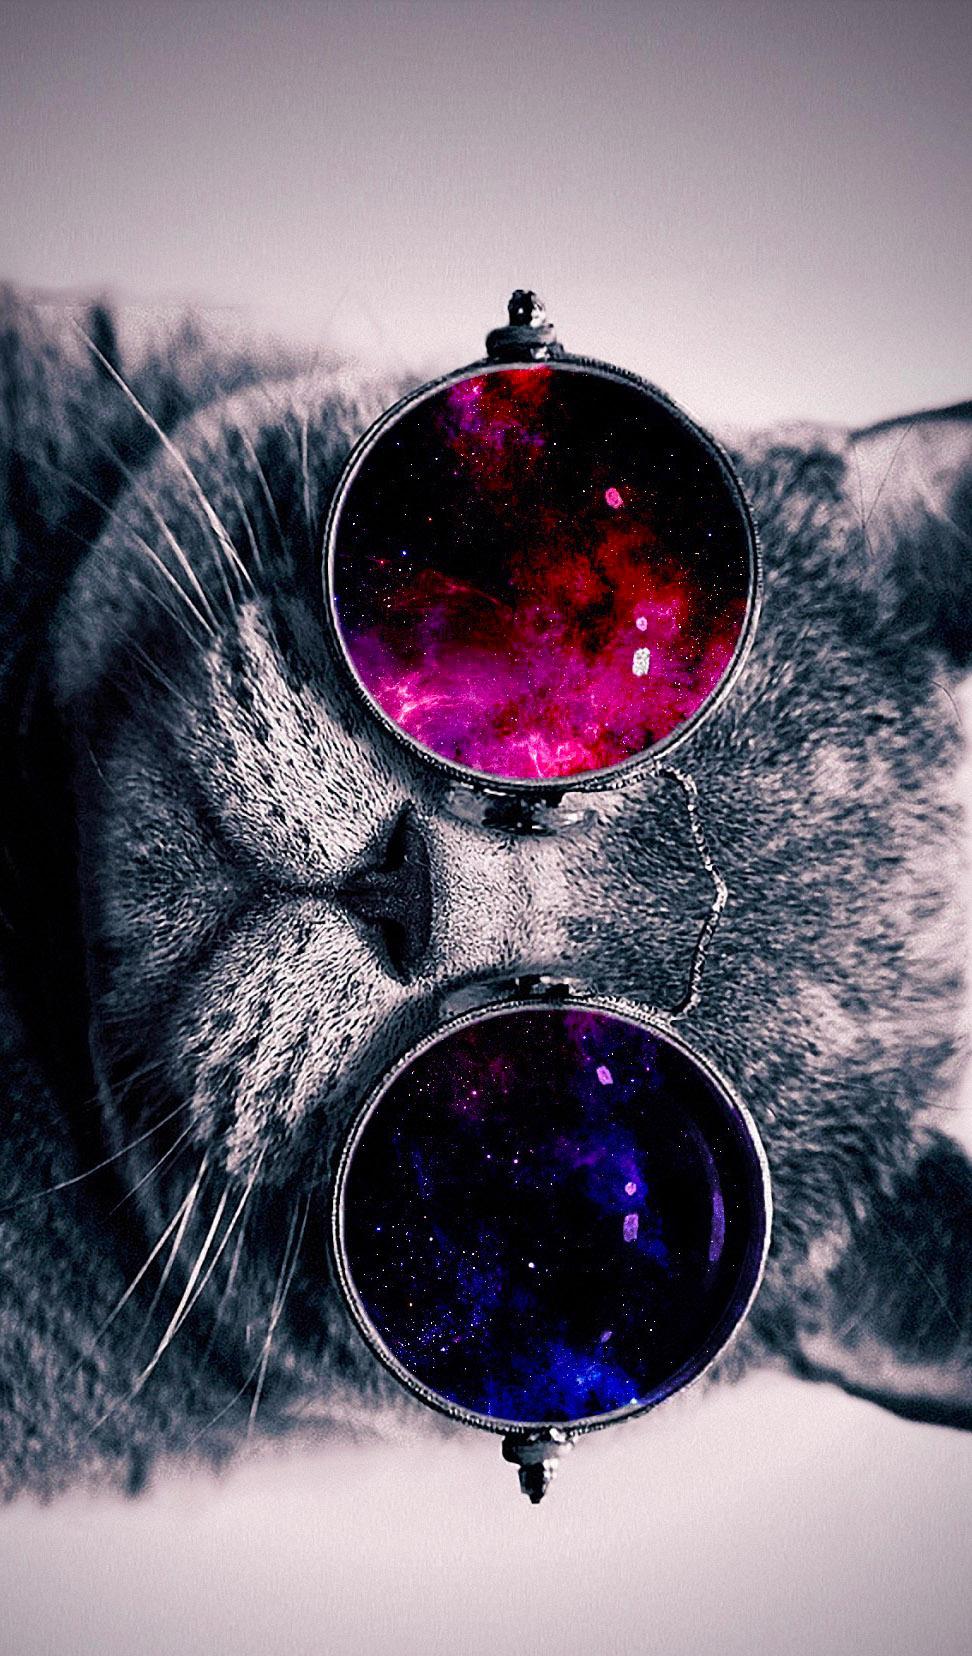 Cat With Glasses Wallpaper